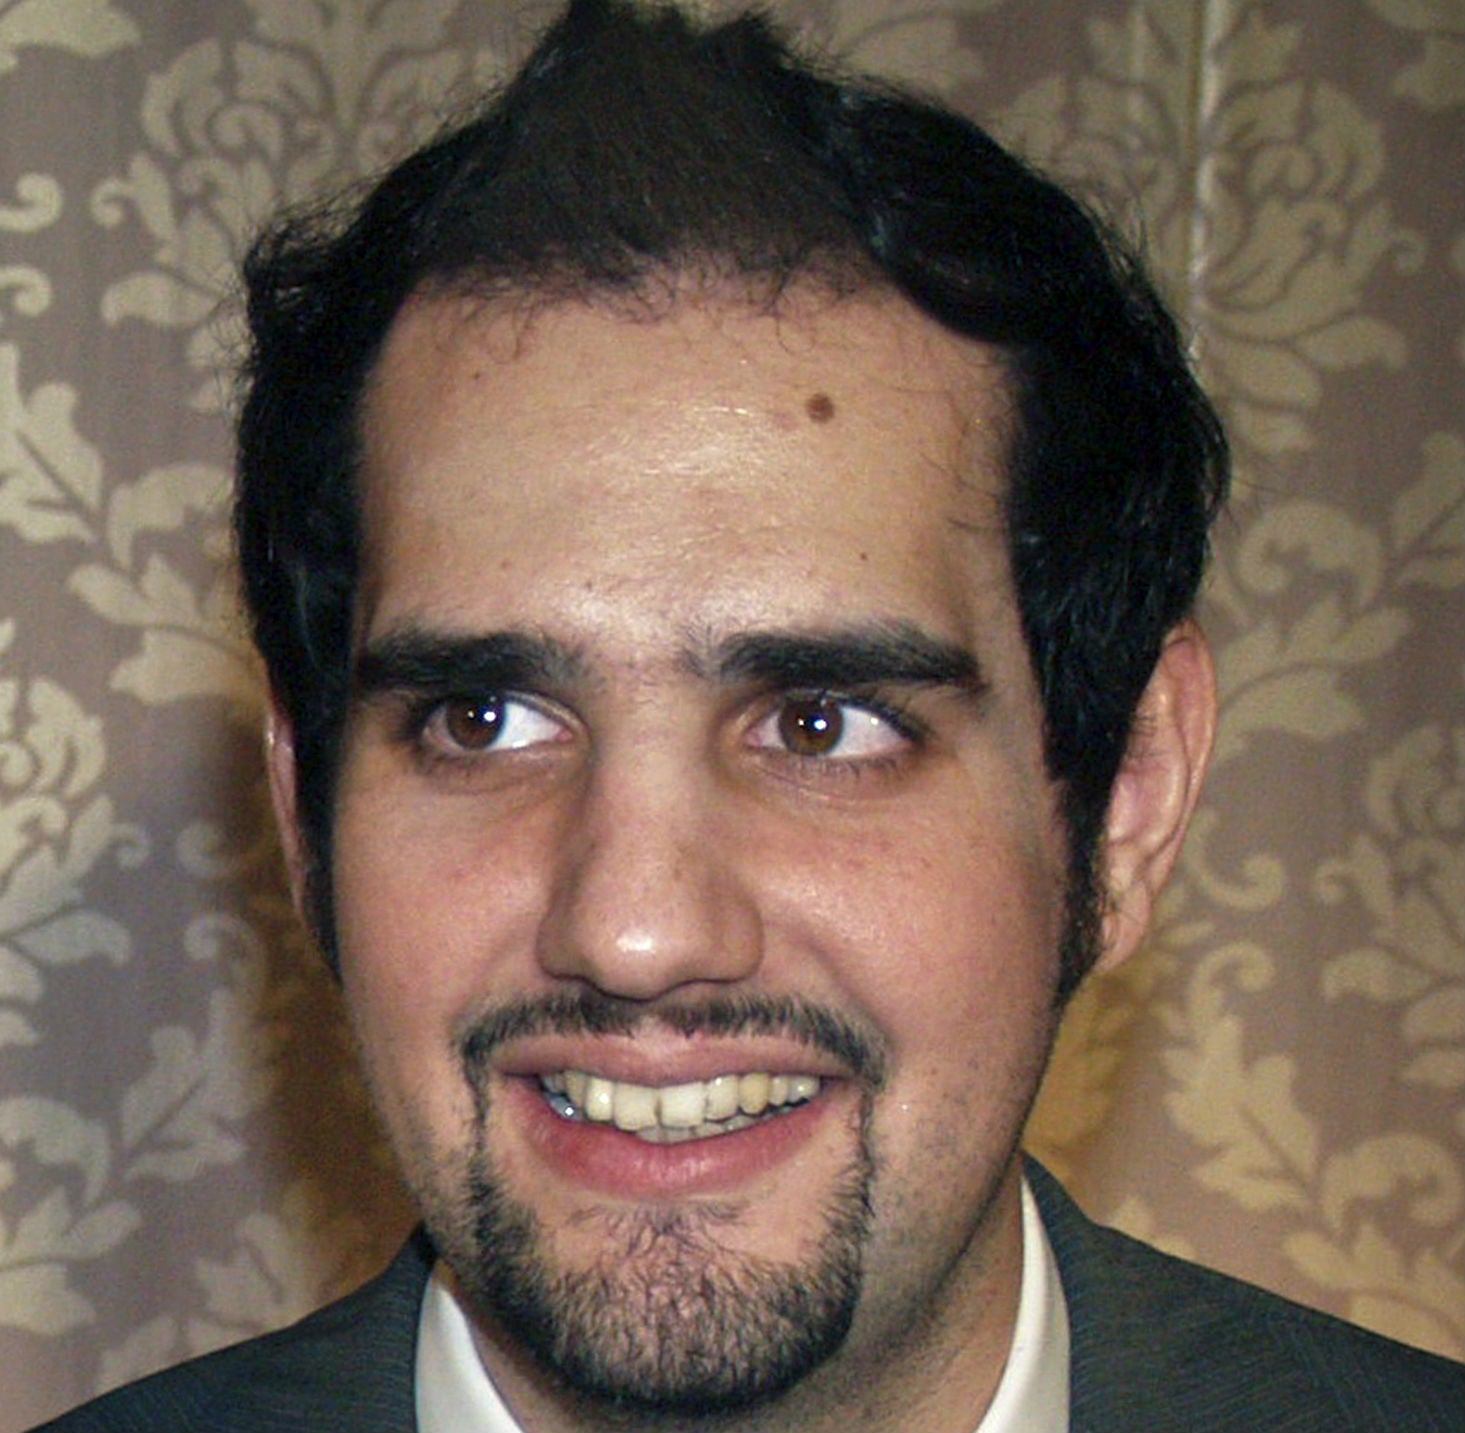 Shahbaz Taseer was recovered from a compound in Balochistan